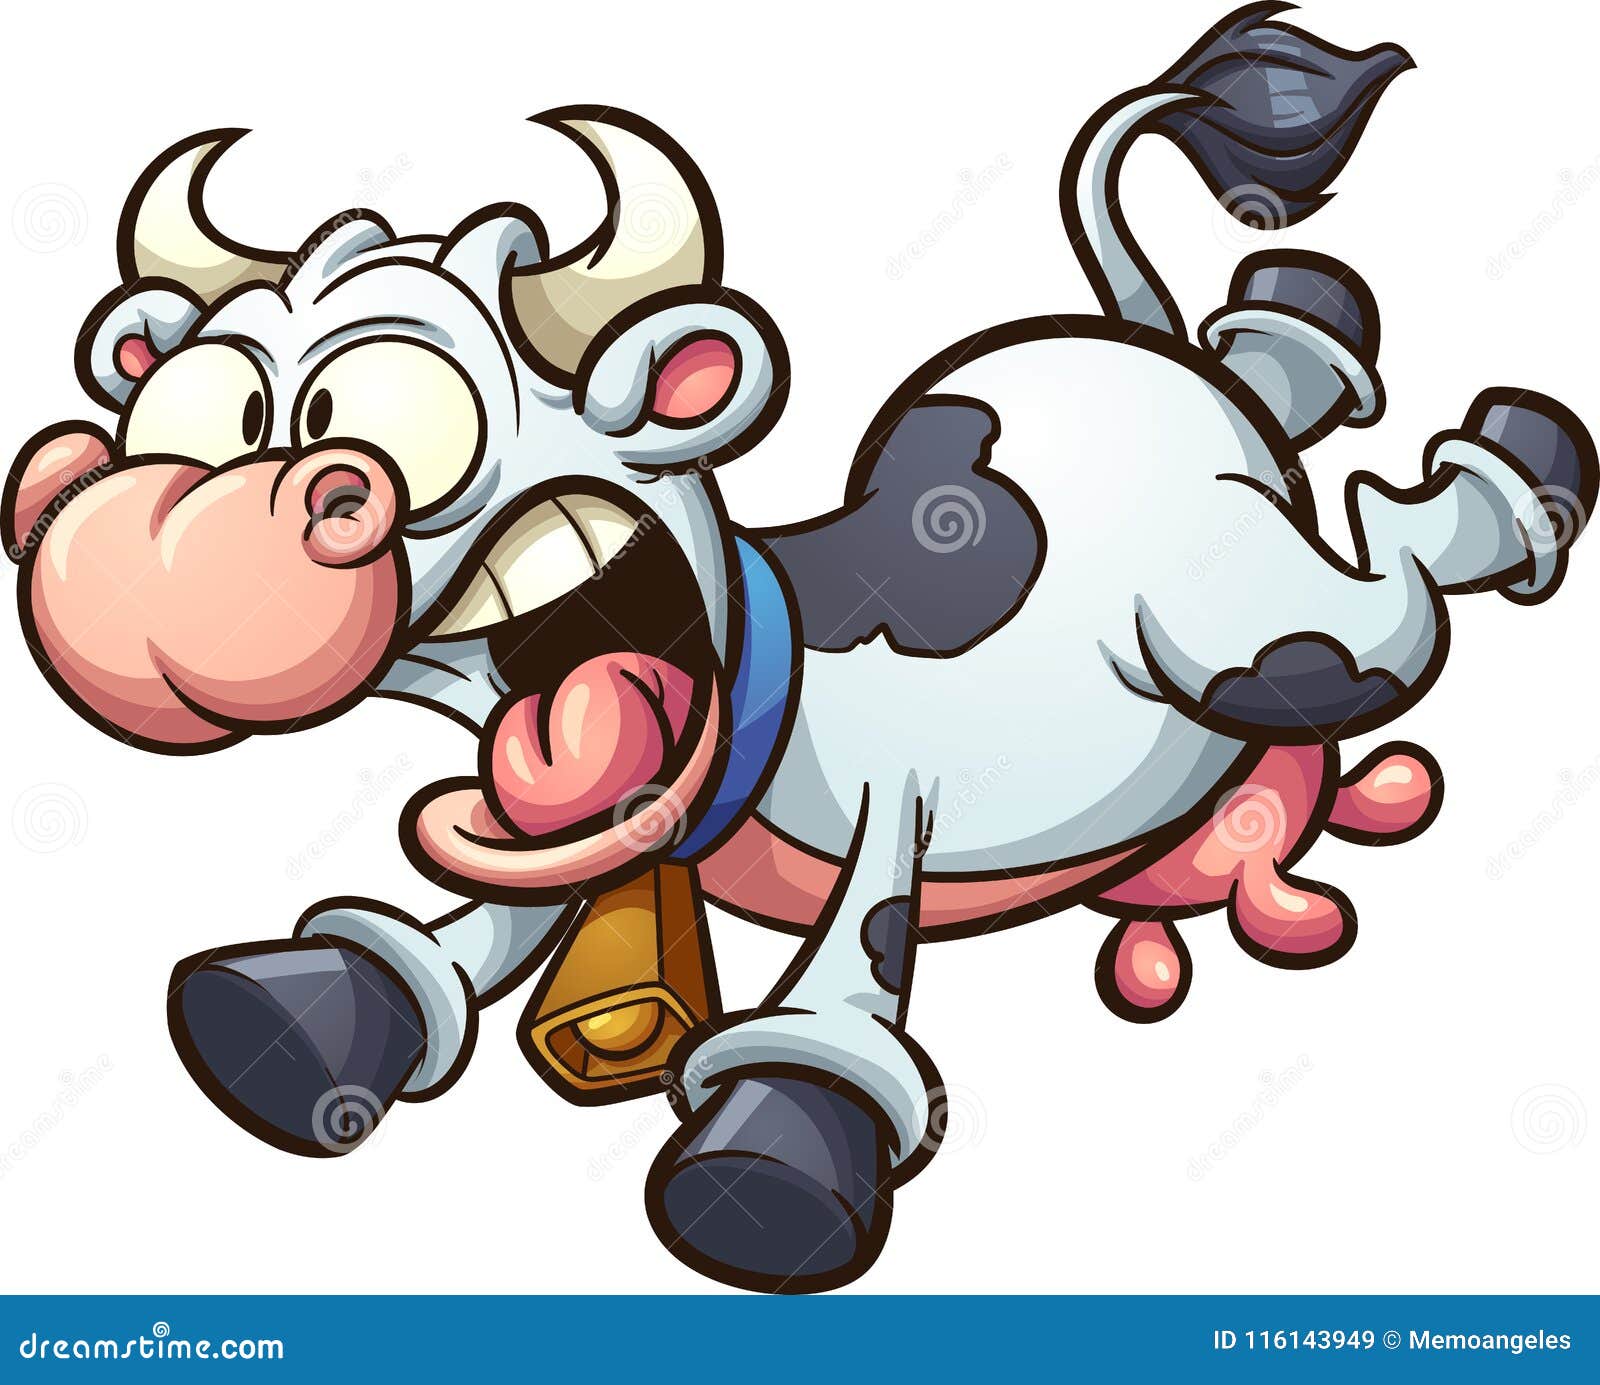 Scared Cartoon Cow Stock Illustrations – 43 Scared Cartoon Cow Stock  Illustrations, Vectors & Clipart - Dreamstime